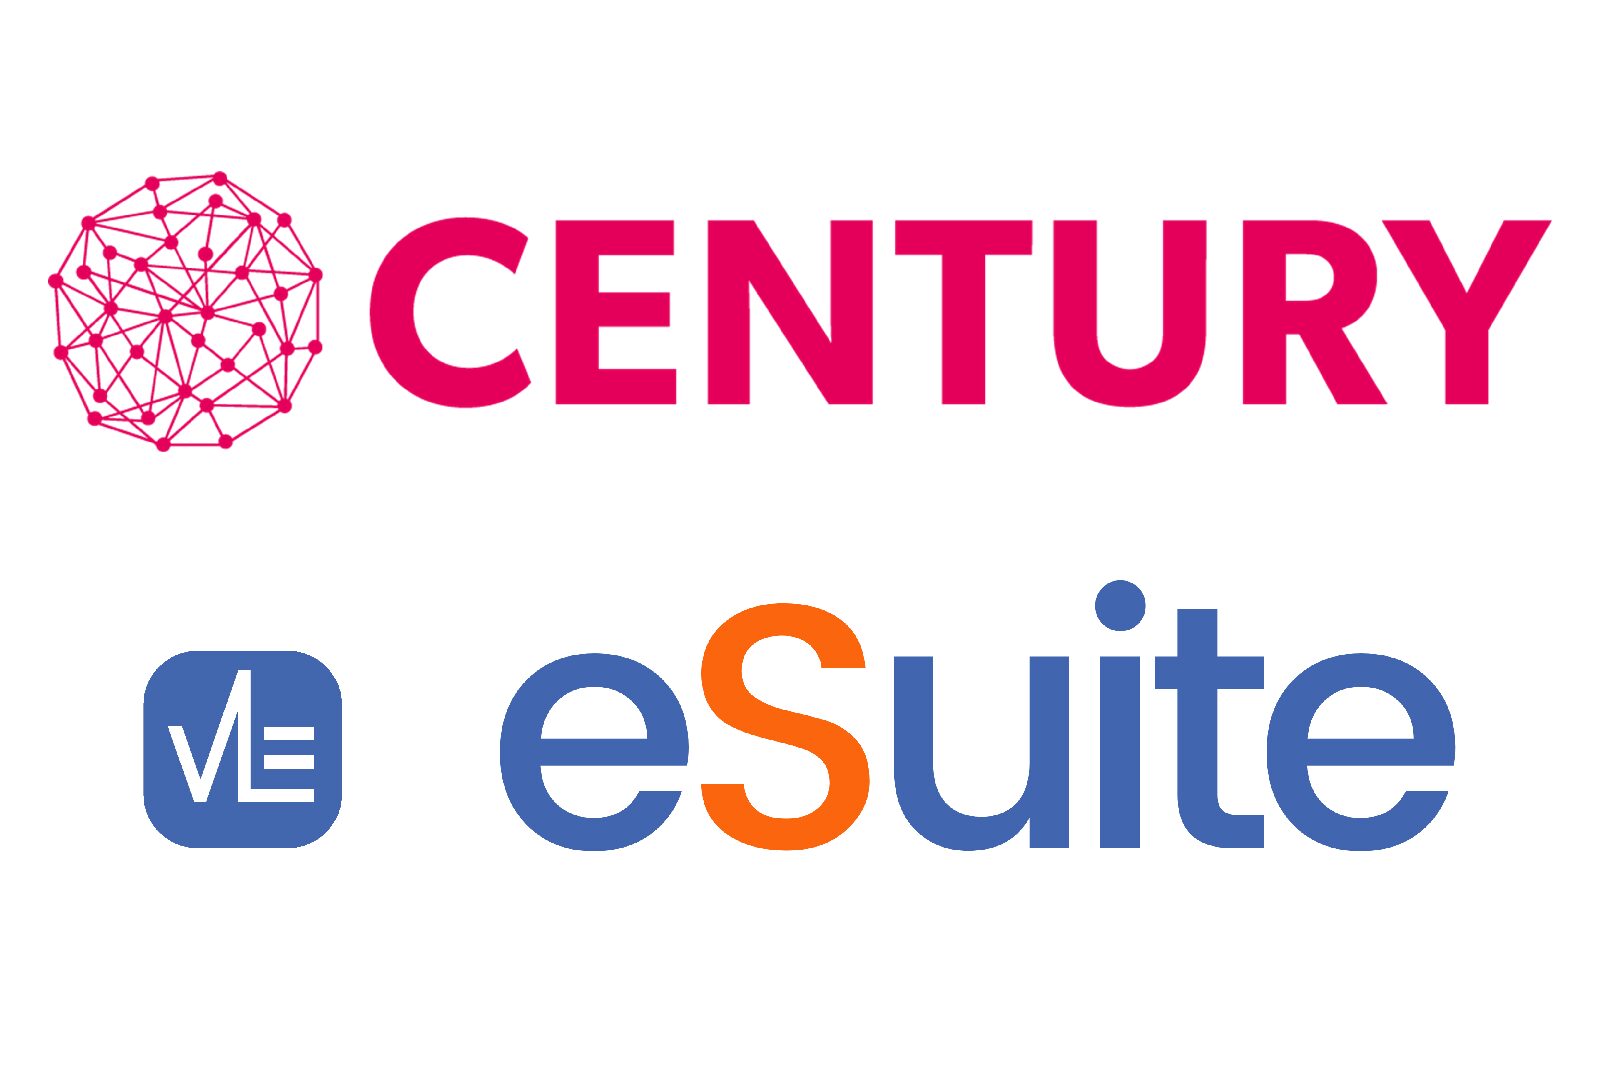 VLE Support and CENTURY Tech “join forces”